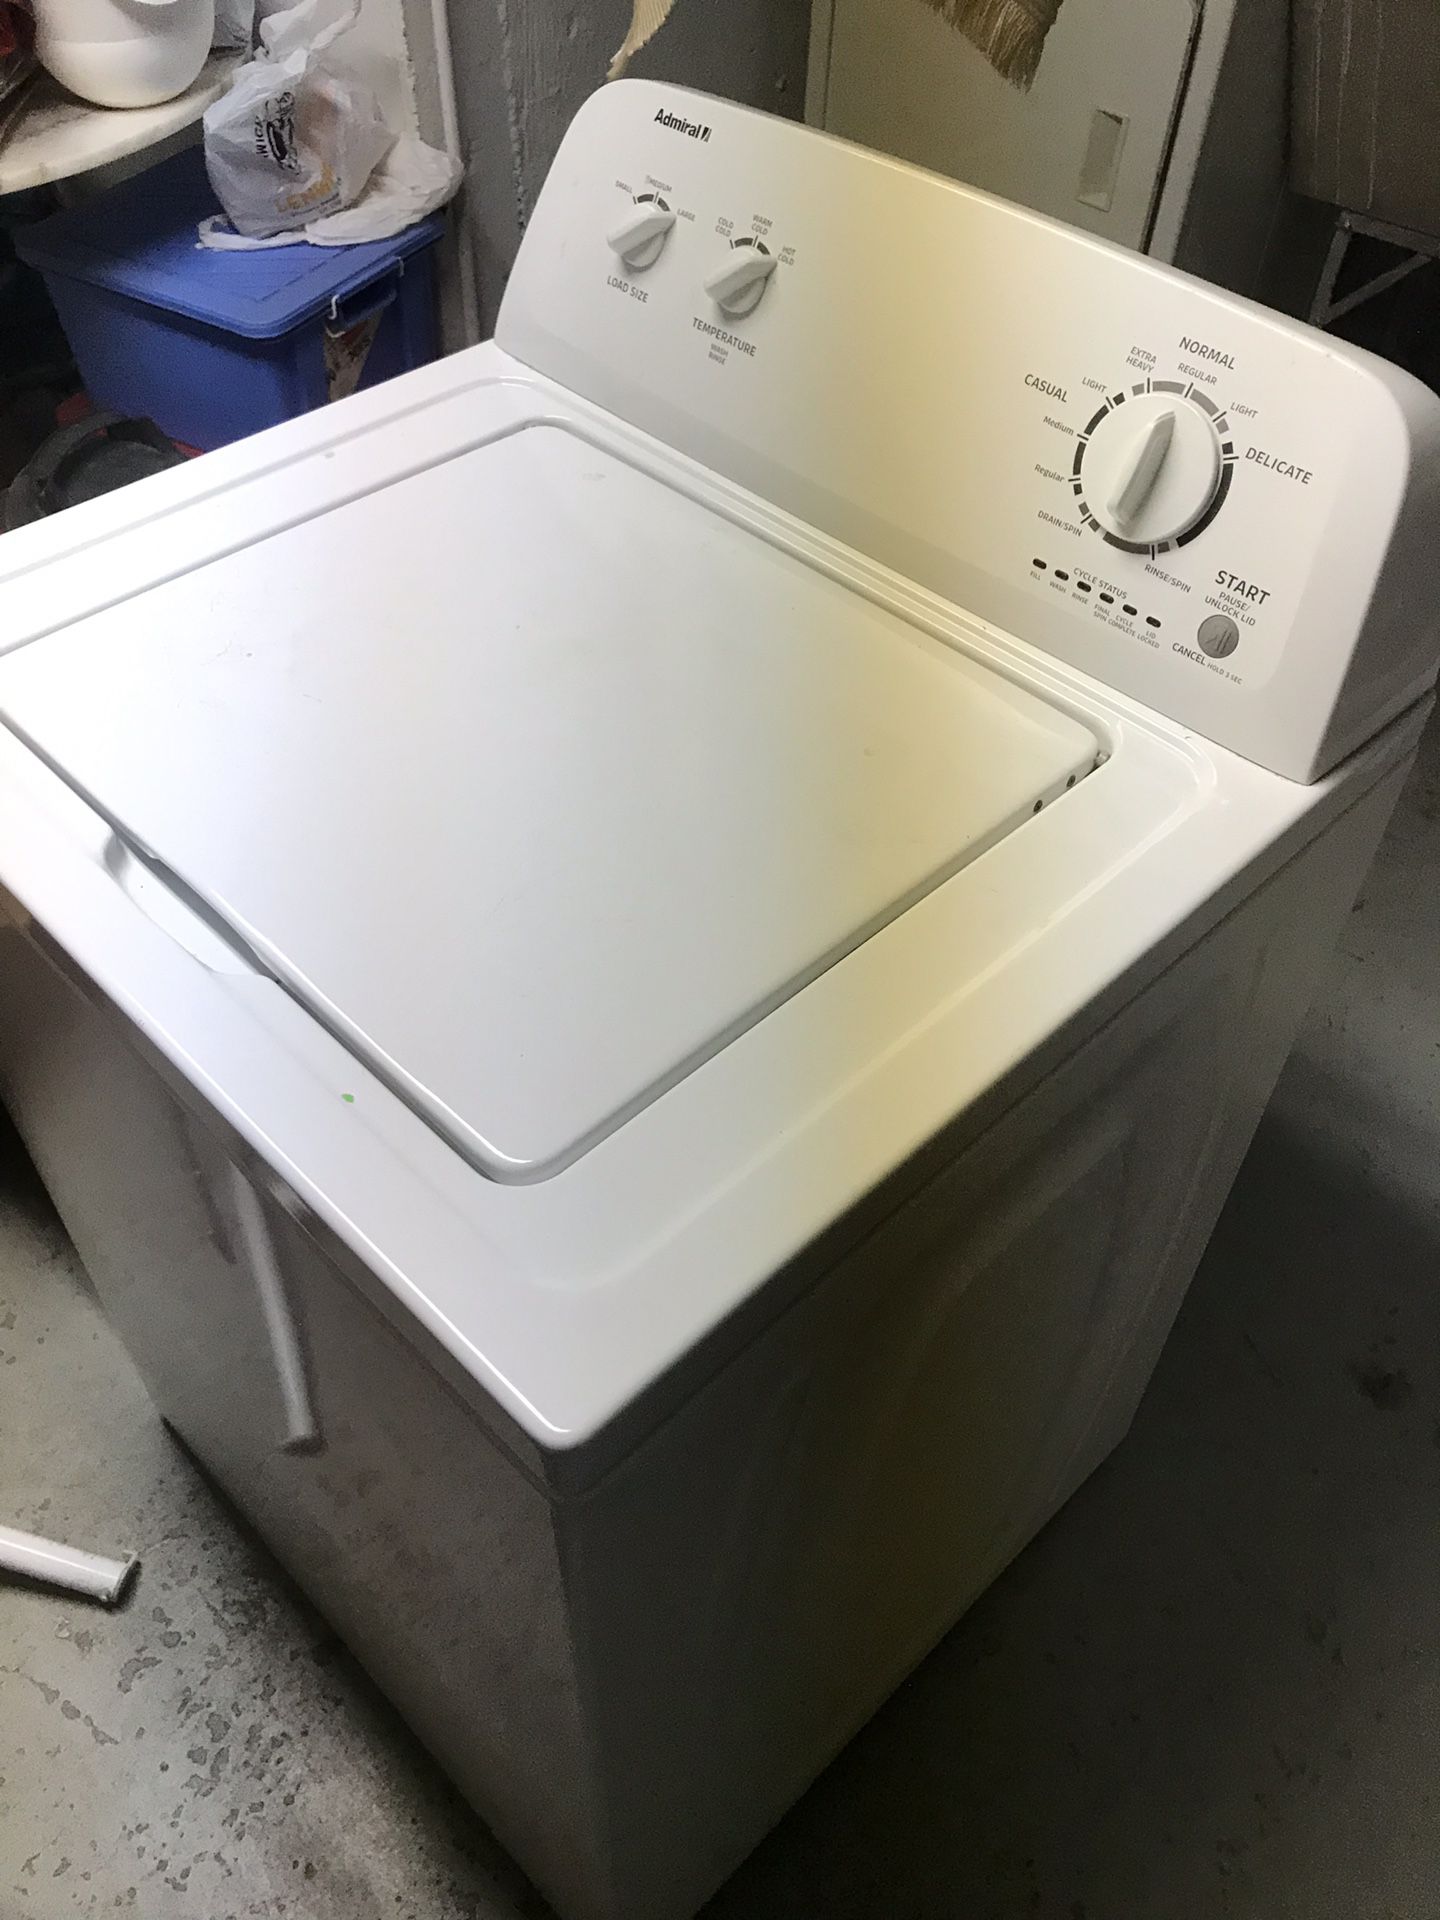 Admiral washer - ATW4675YQ1 - working great!